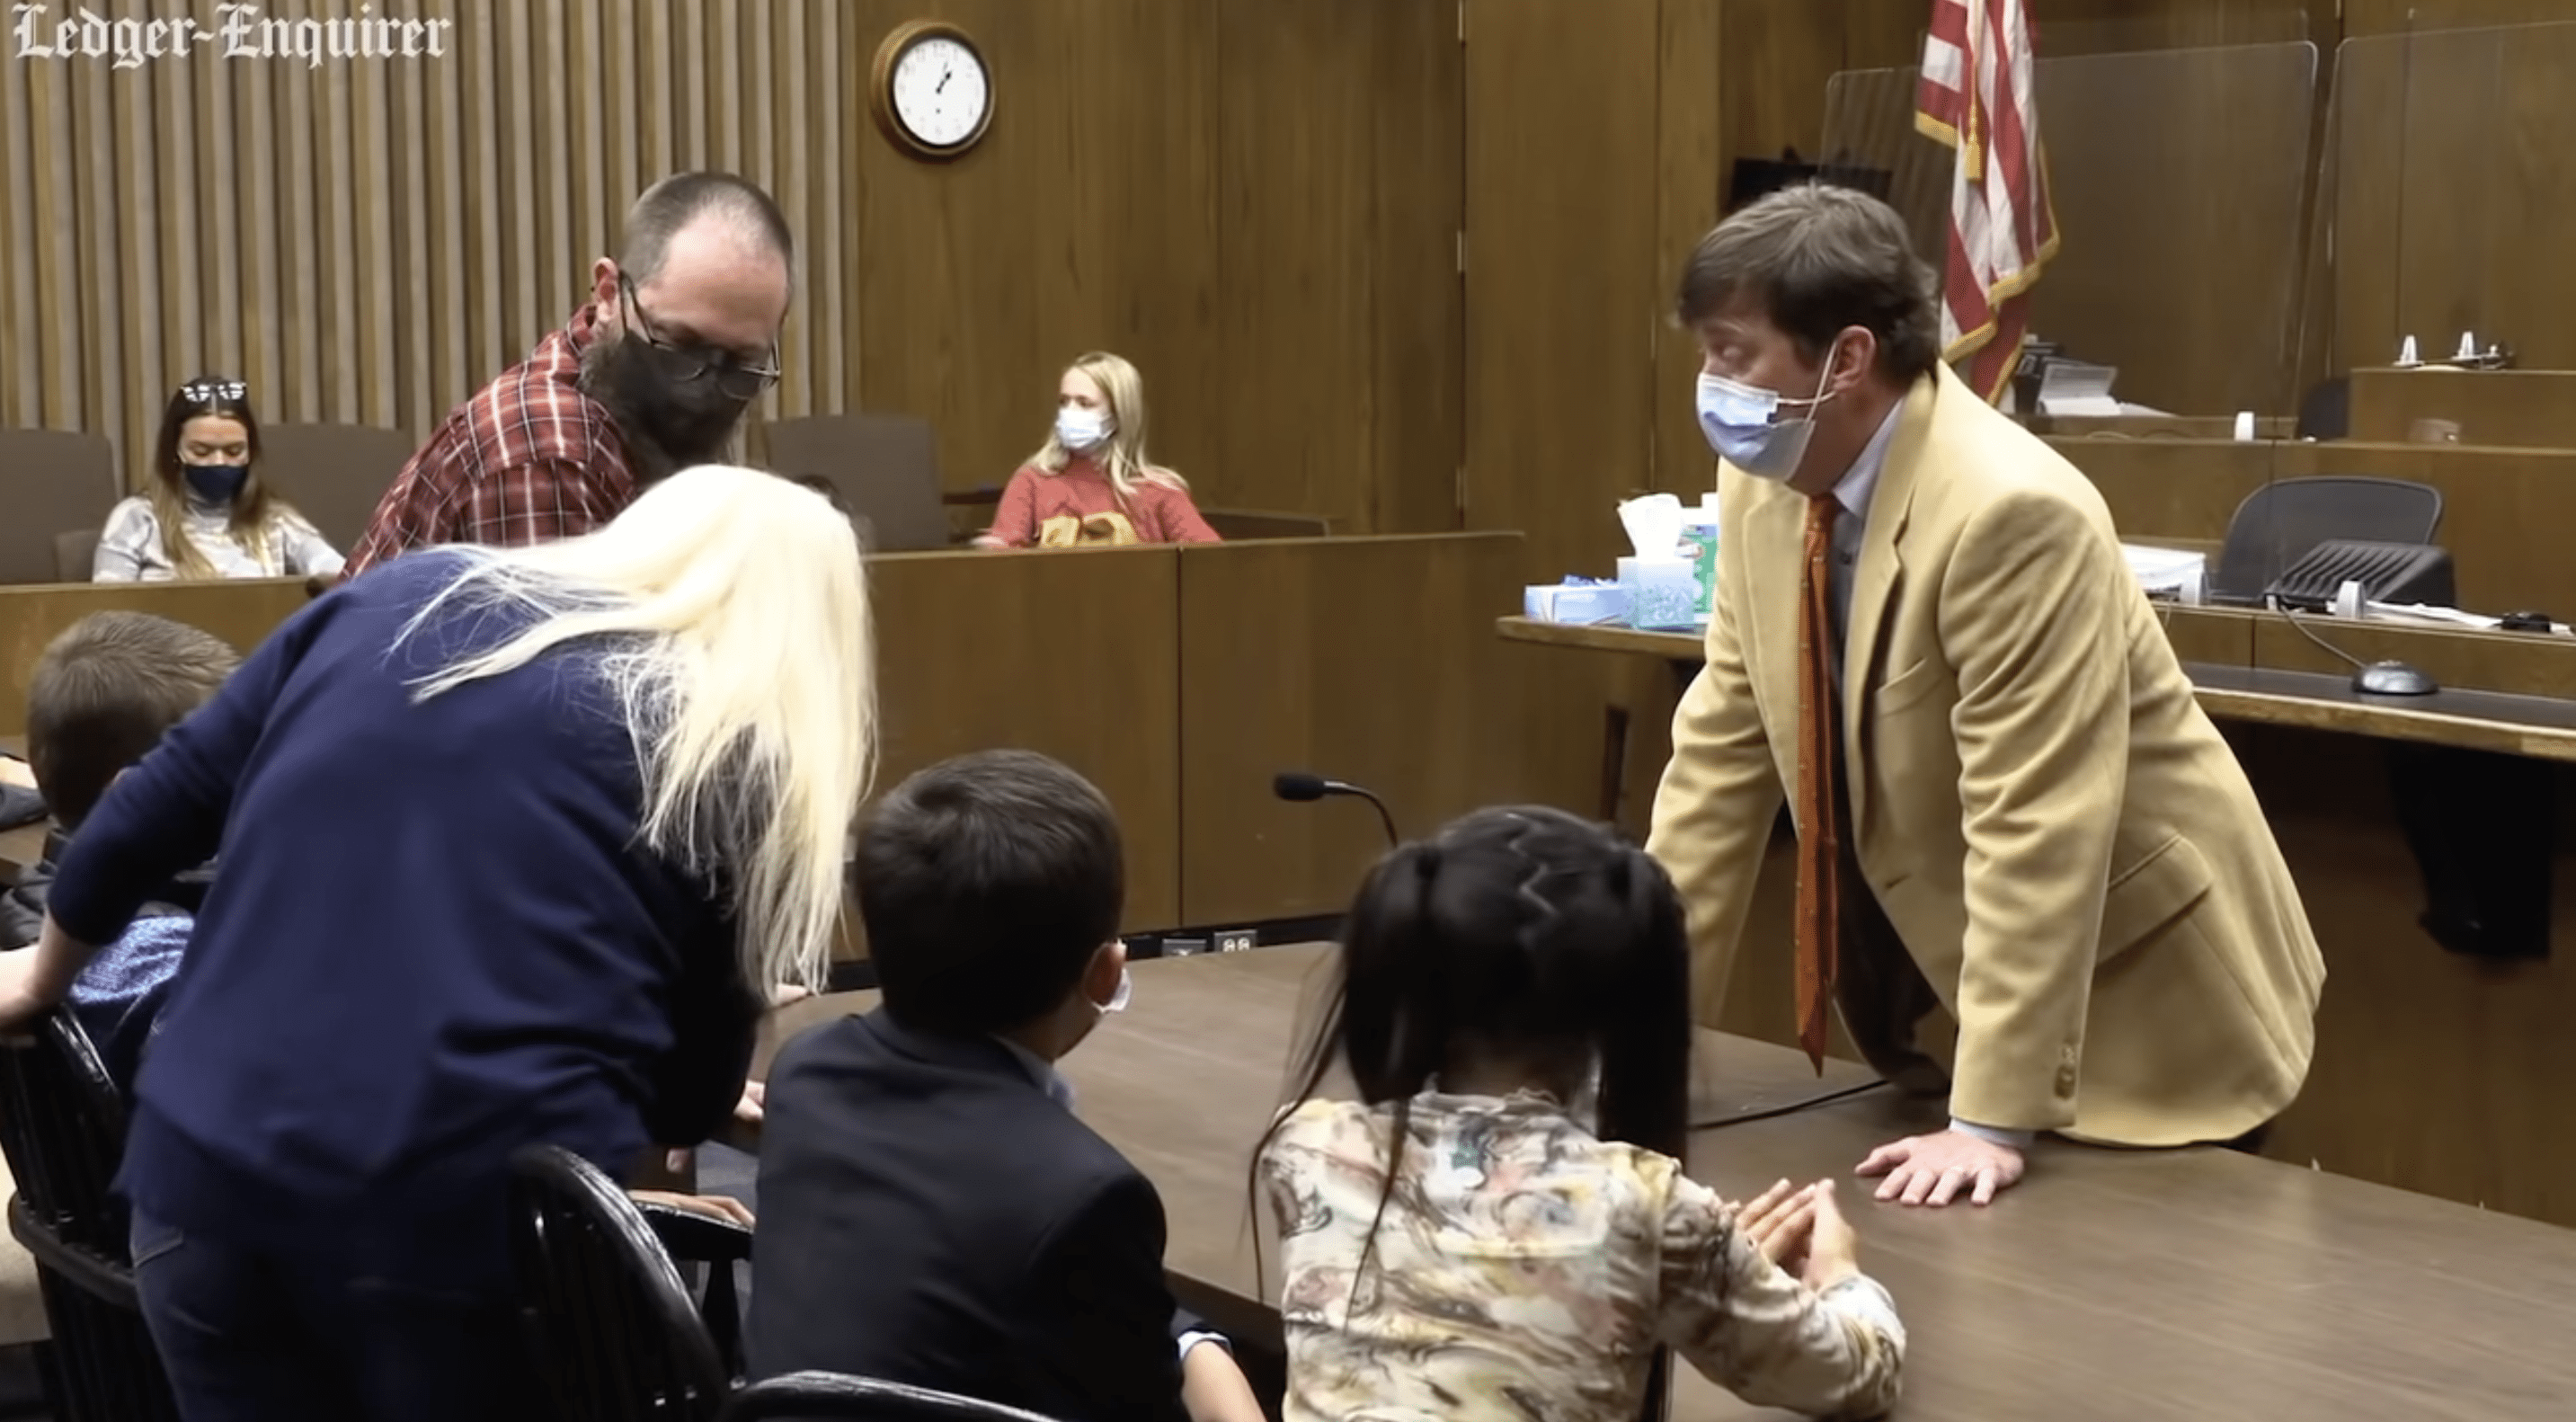 The Turbevilles with their foster children at the adoption hearing. | Photo: YouTube.com/Columbus Ledger-Enquirer